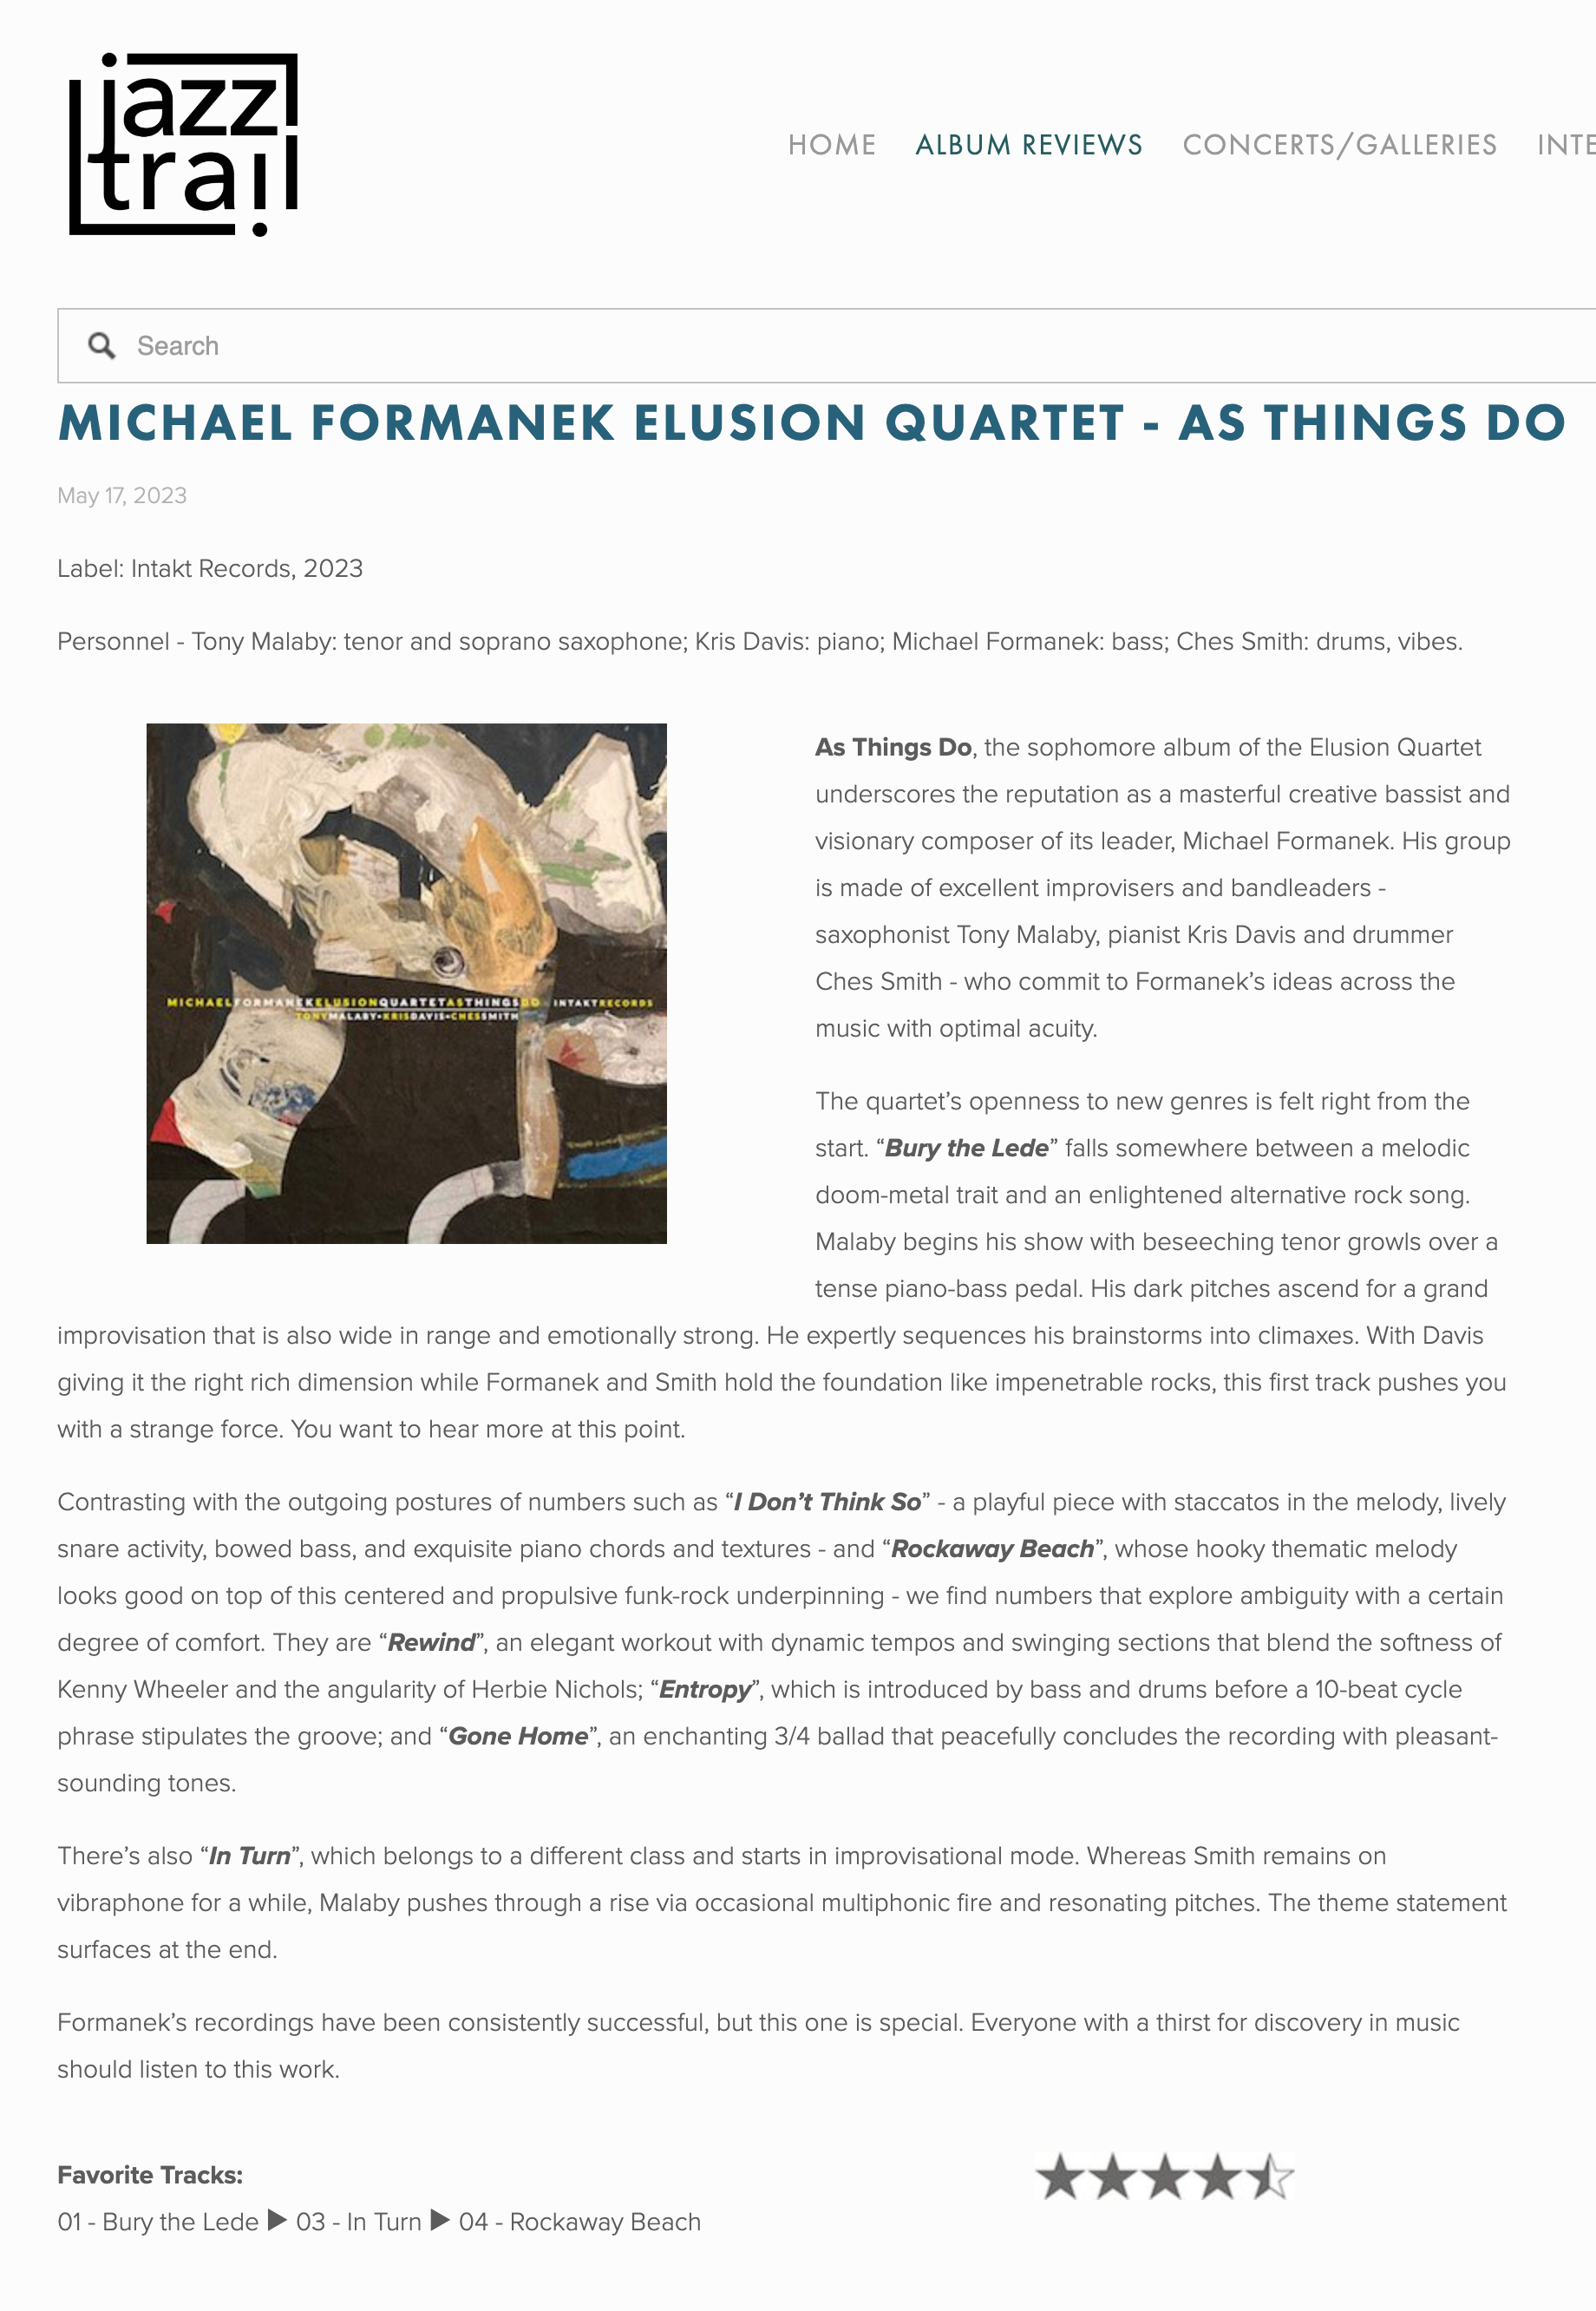 As Things Do, the sophomore album of the Elusion Quartet underscores the reputation as a masterful creative bassist and visionary composer of its leader, Michael Formanek. His group is made of excellent improvisers and bandleaders - saxophonist Tony Malaby, pianist Kris Davis and drummer Ches Smith - who commit to Formanek’s ideas across the music with optimal acuity.